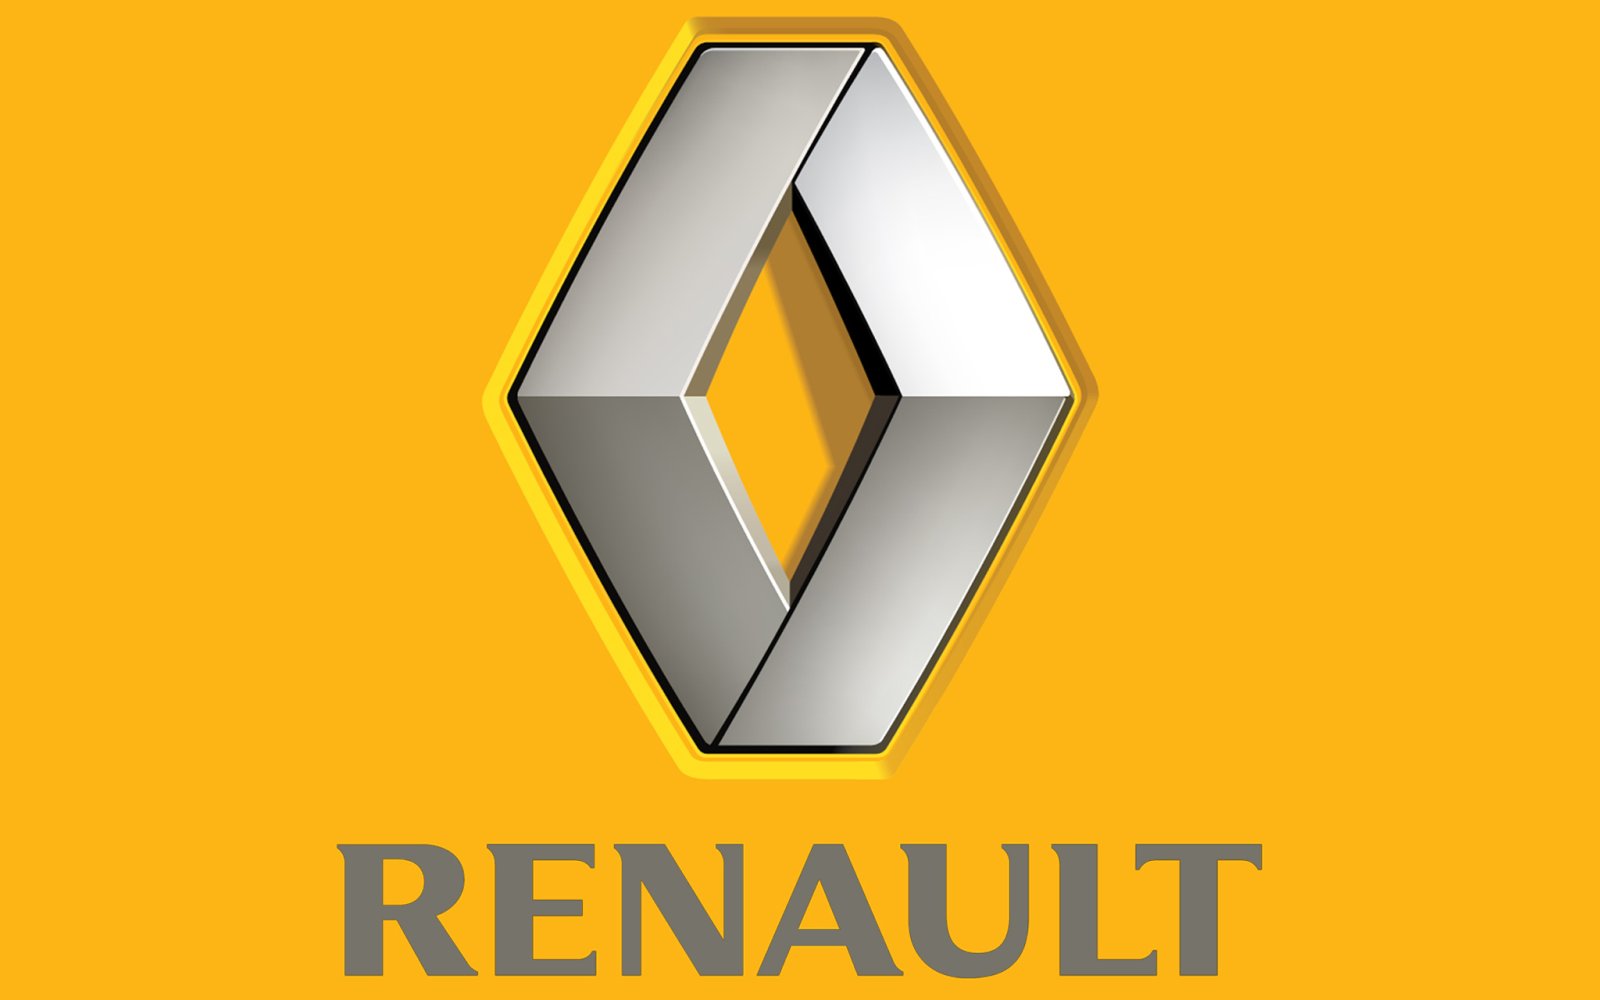 Renault has a new logo!  But what does the Renault logo actually mean?